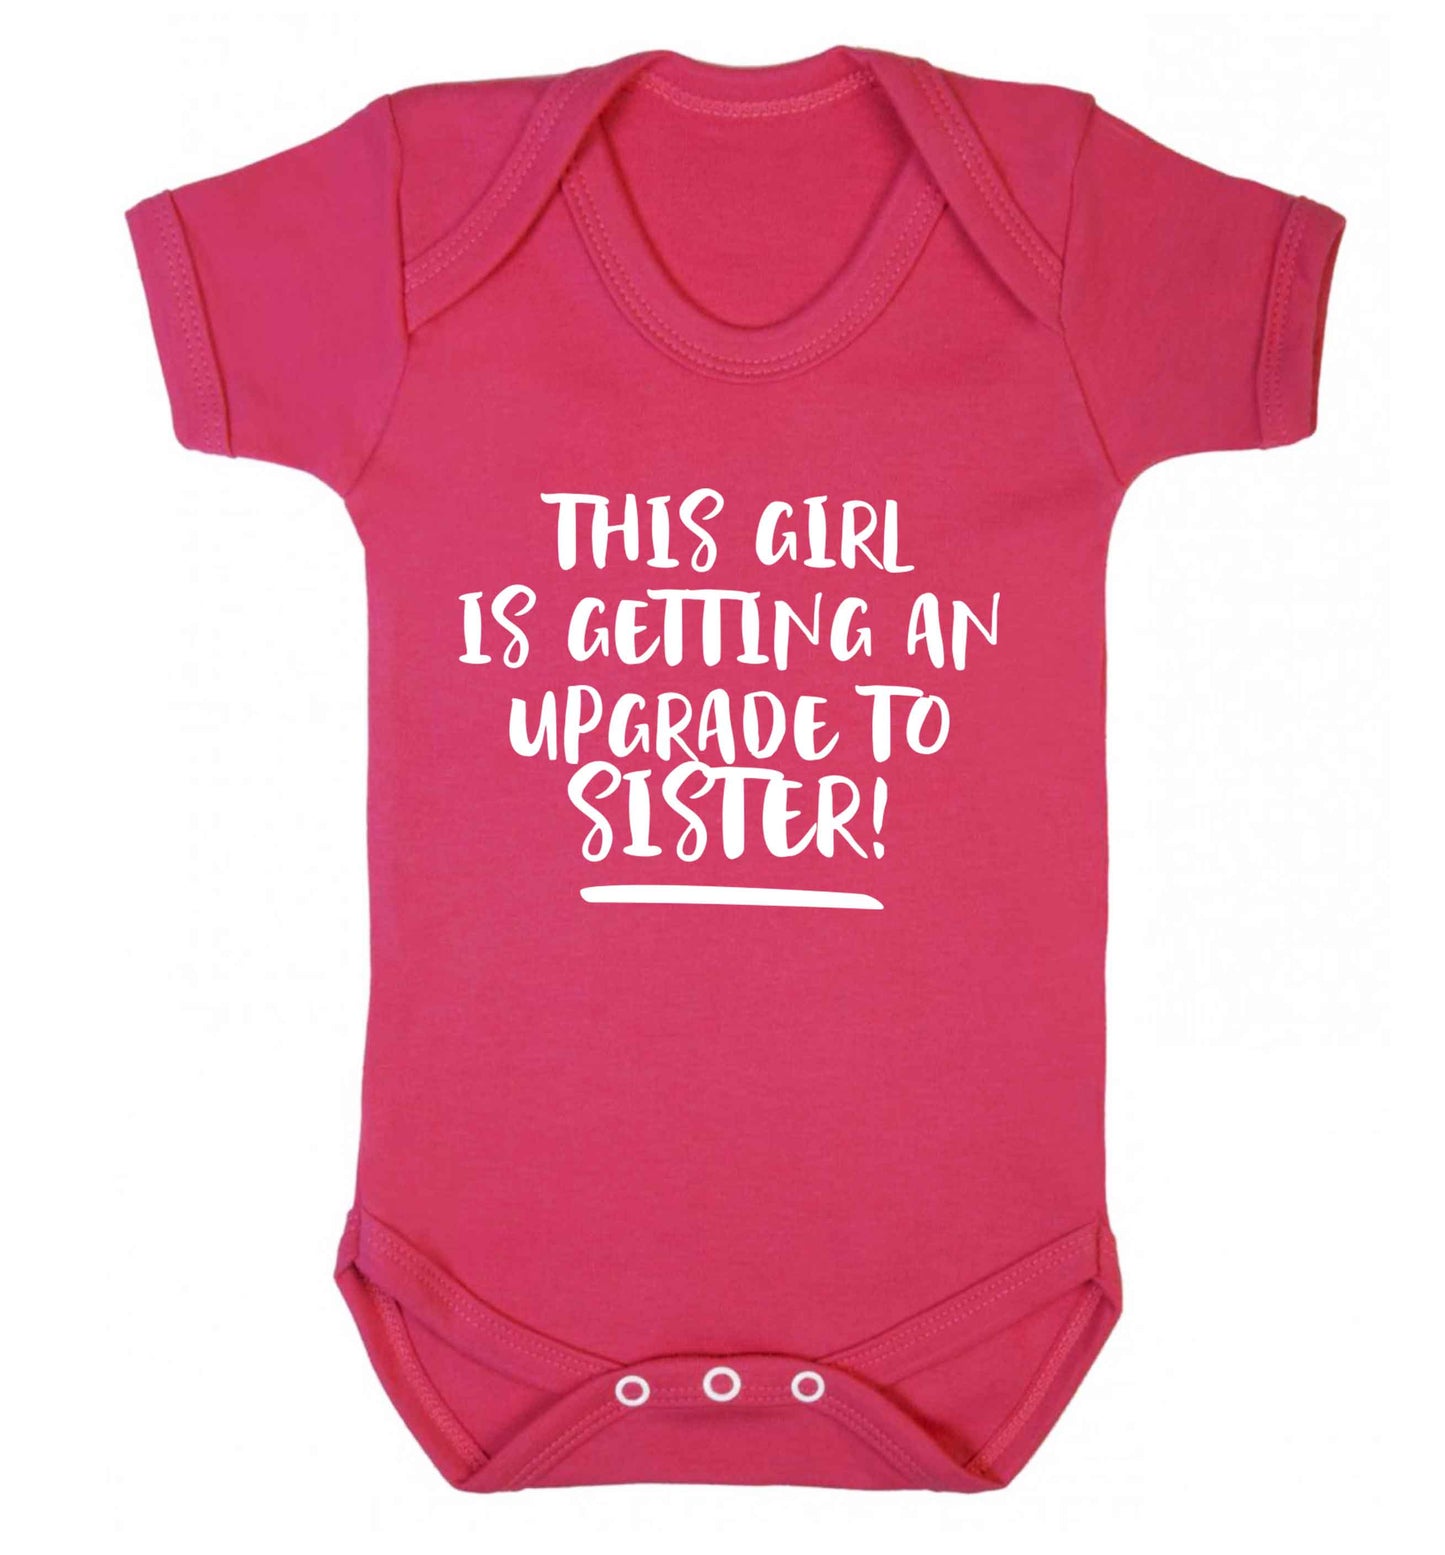 This girl is getting an upgrade to sister! Baby Vest dark pink 18-24 months